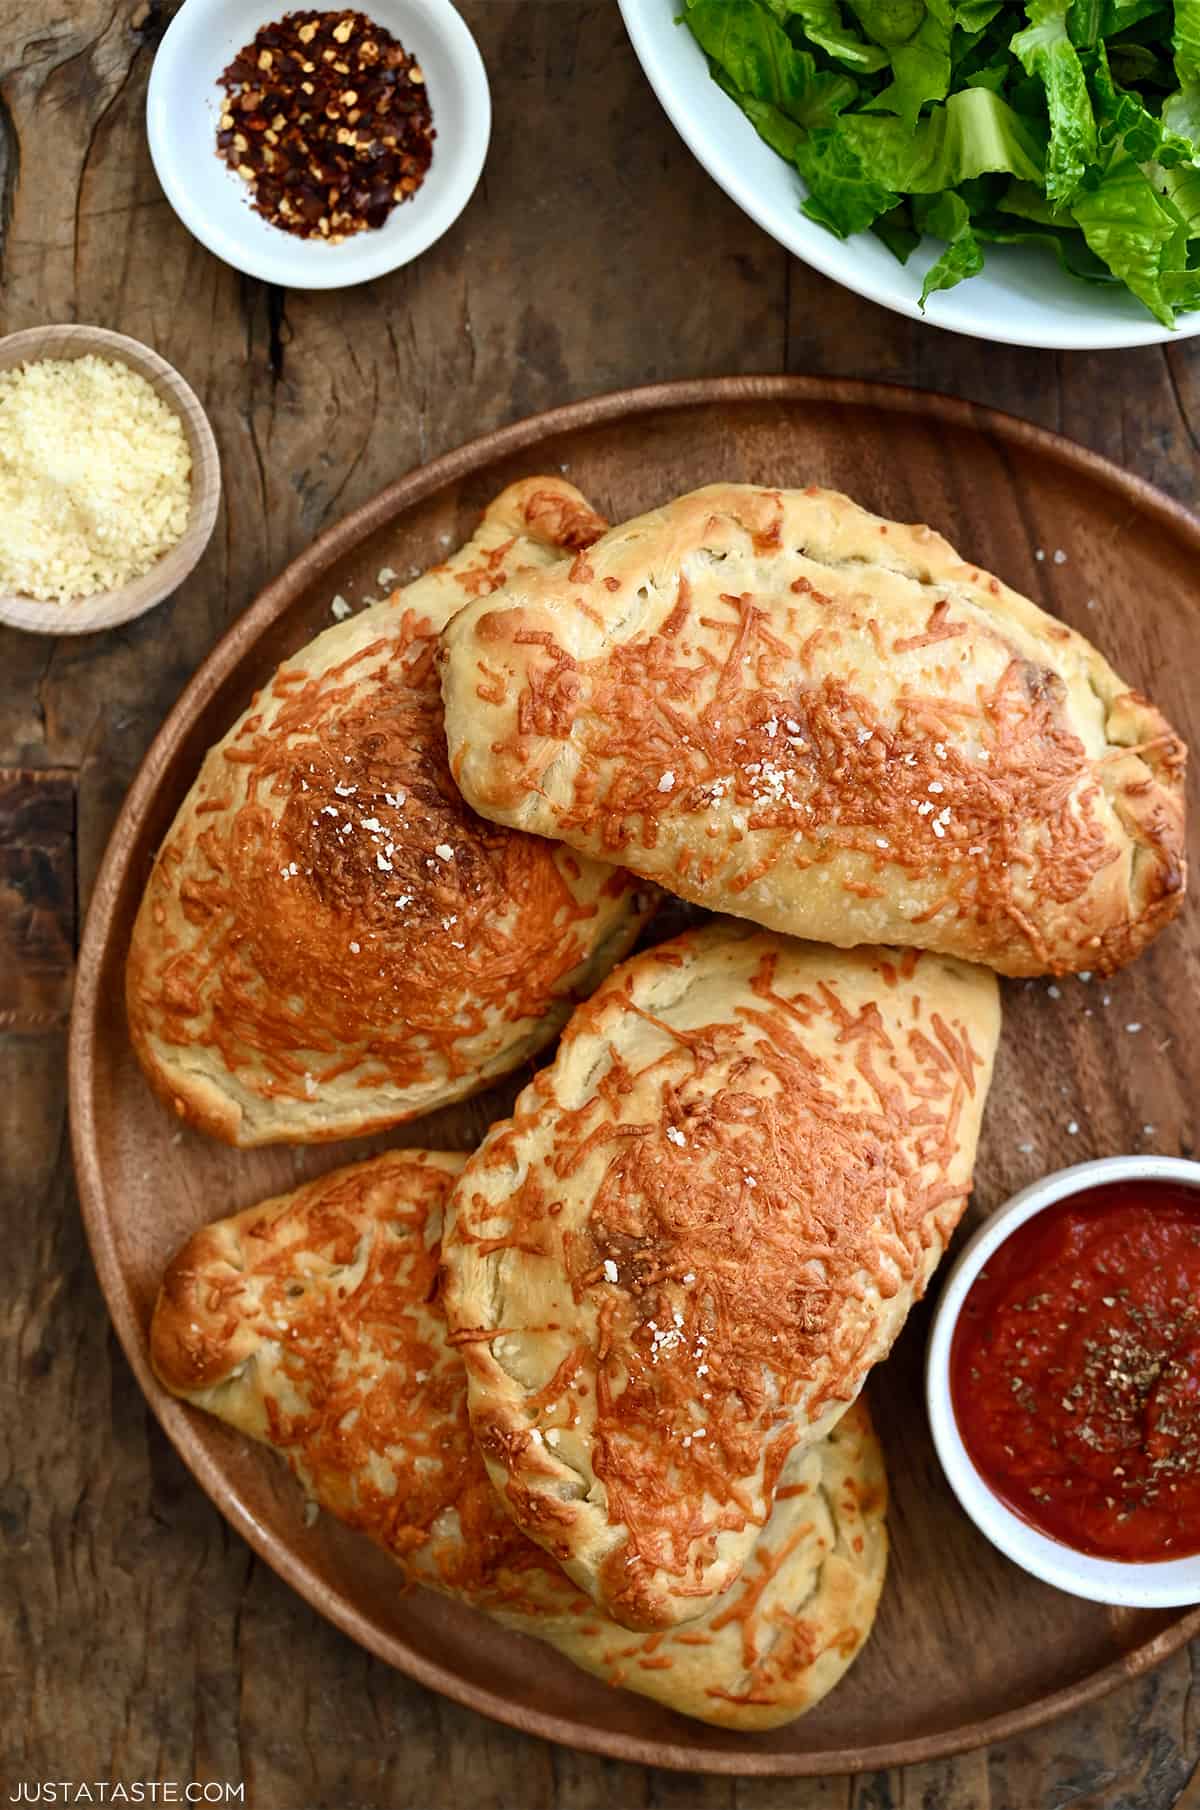 Four perfectly golden brown calzones on a dinner plate with a small bowl containing marinara sauce.